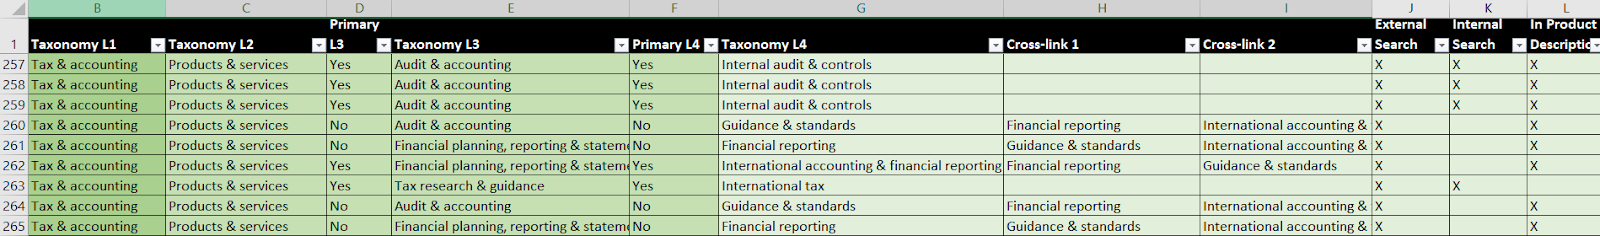 Excel file screenshot of taxonomy example from Thomson Reuters